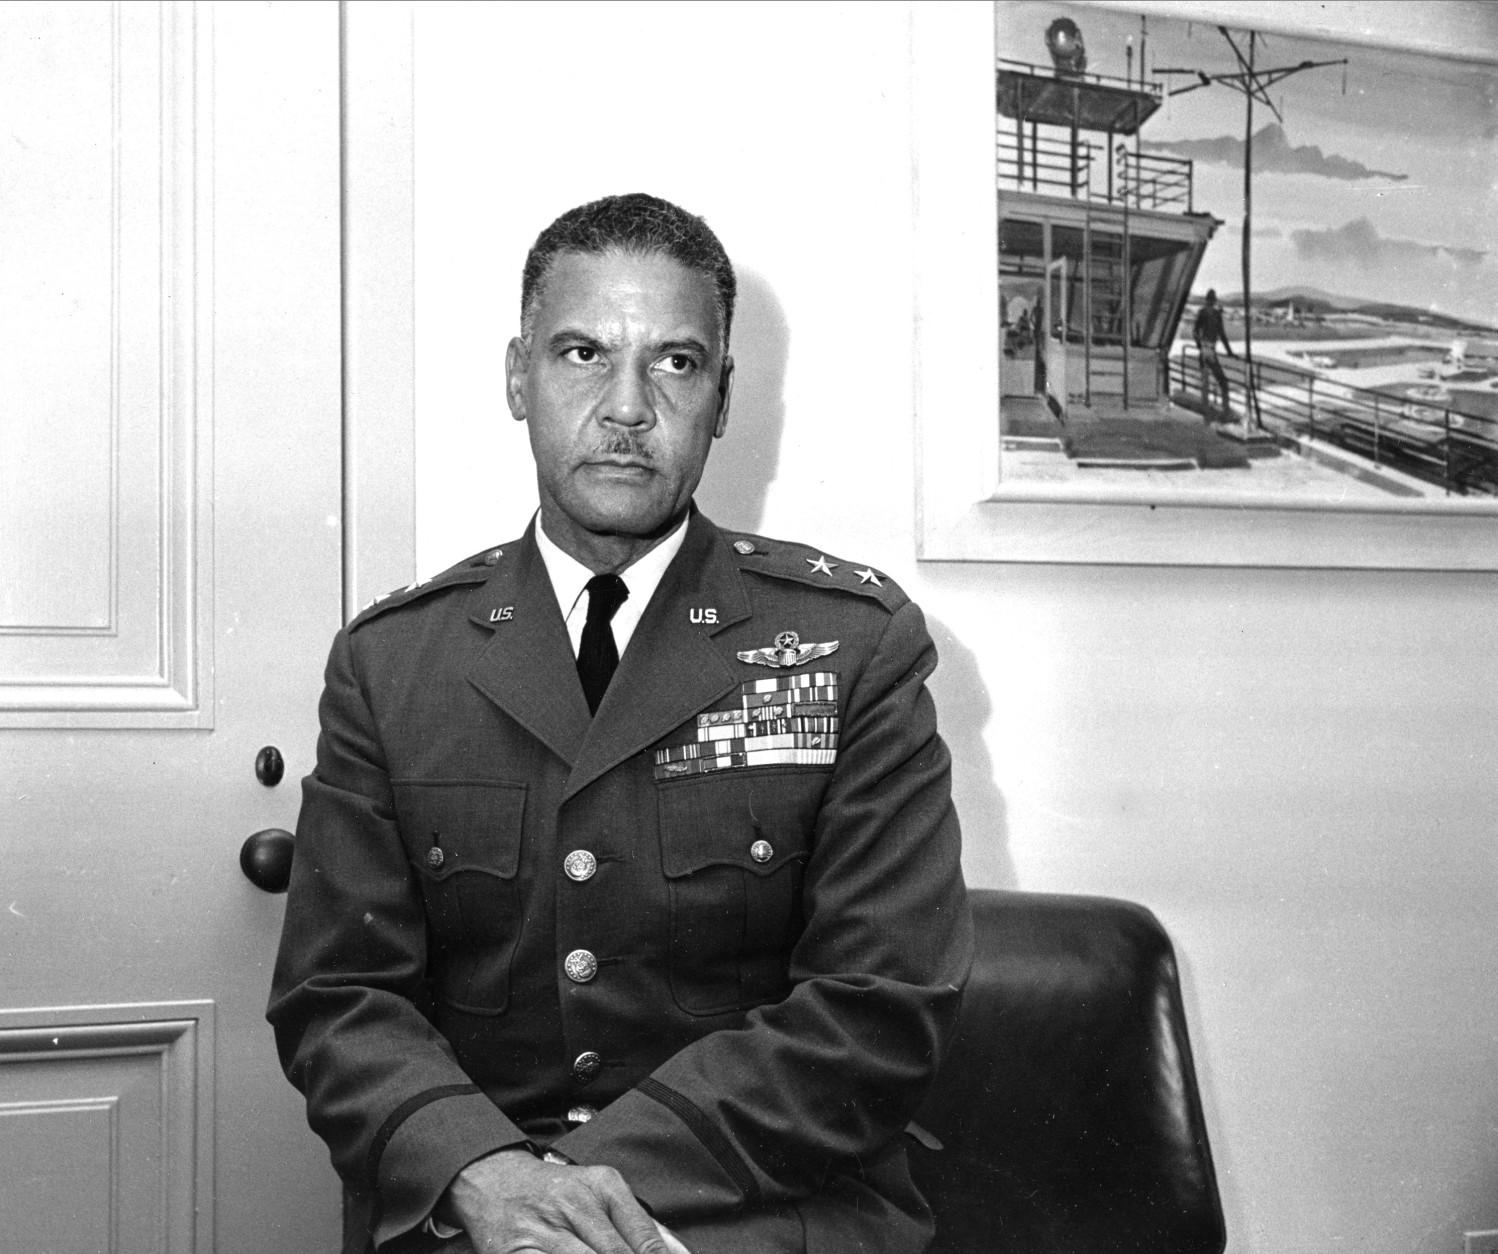 Gen. Benjamin O. Davis Jr., poses in his Pentagon office in Washington, D.C., April 16, 1965.  President Lyndon Johnson has nominated Davis for promotion to Lieutenant General in the Air Force and picked him to be chief of staff of U.S. forces and of the United Nations command in Korea.  Davis, 52, is the first black American to reach lieutenant general rank in the U.S. military.  (AP Photo)